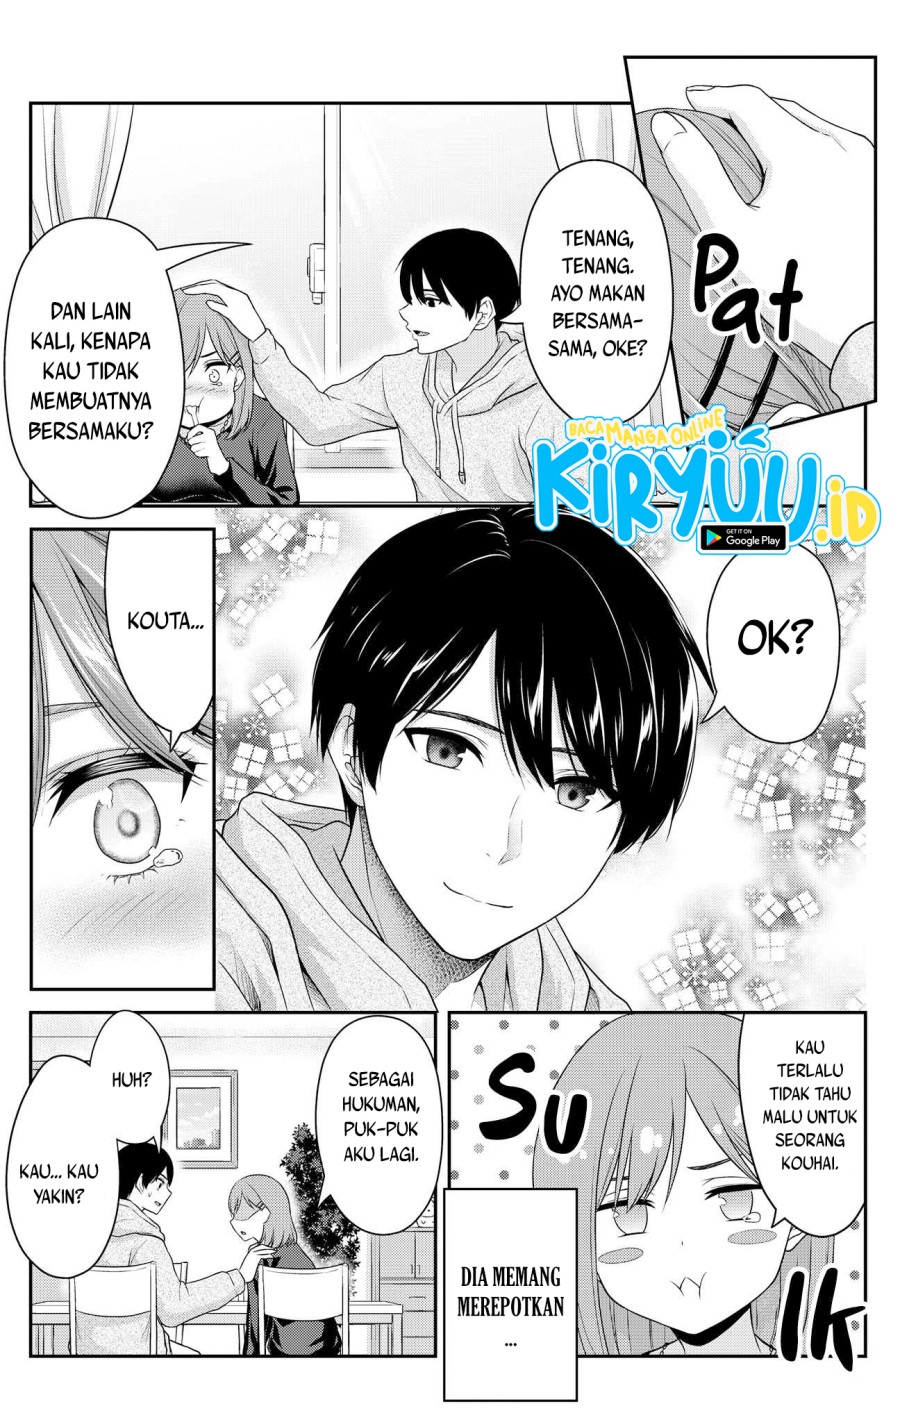 Life of a Former Senpai Wife and a Former Kouhai Husband Chapter 00